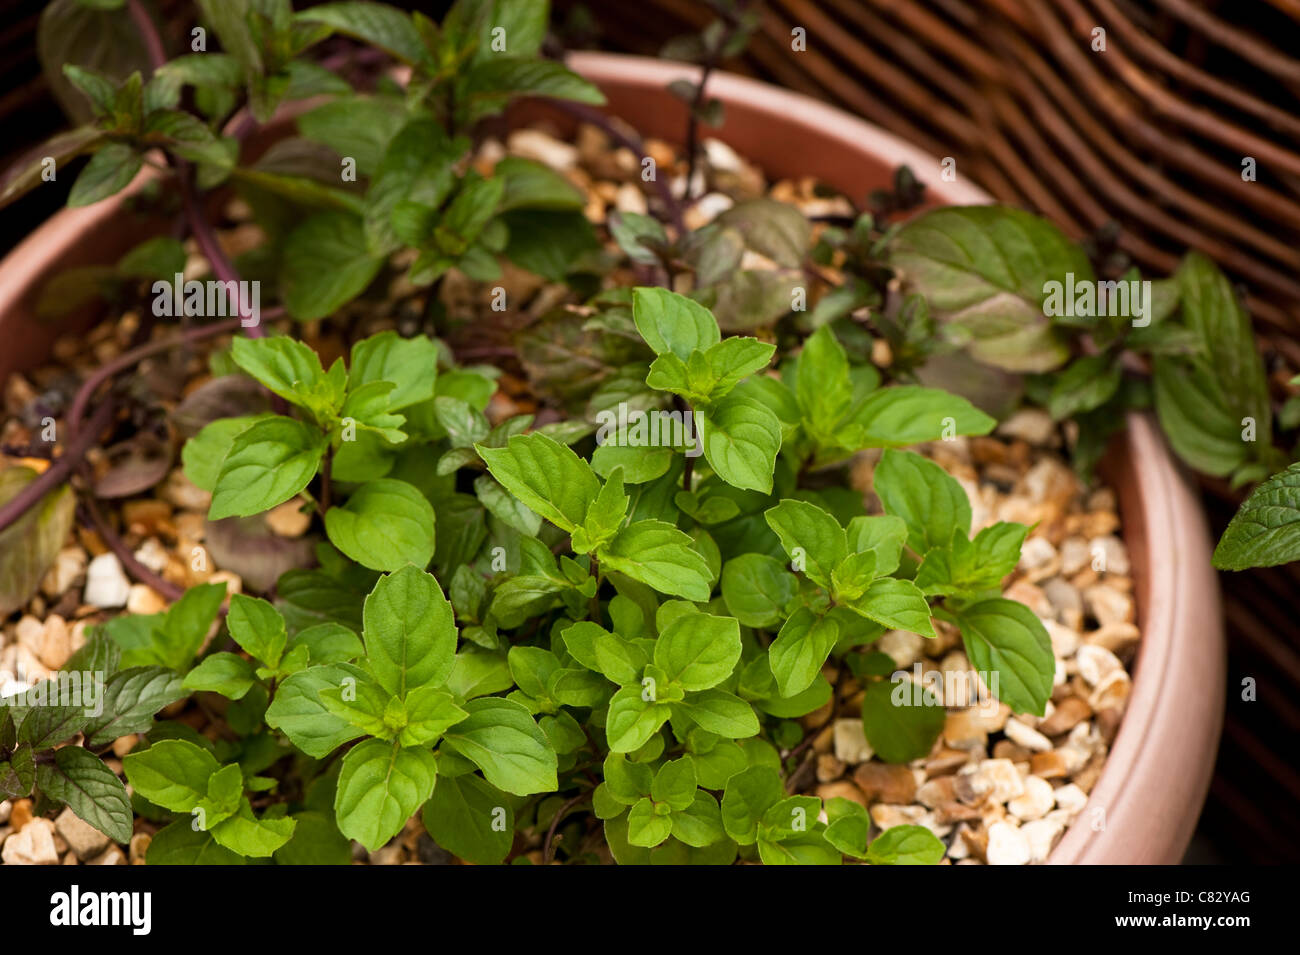 Mentha x gracilis syn. Mentha x gentilis, Ginger Mint, growing in a container Stock Photo